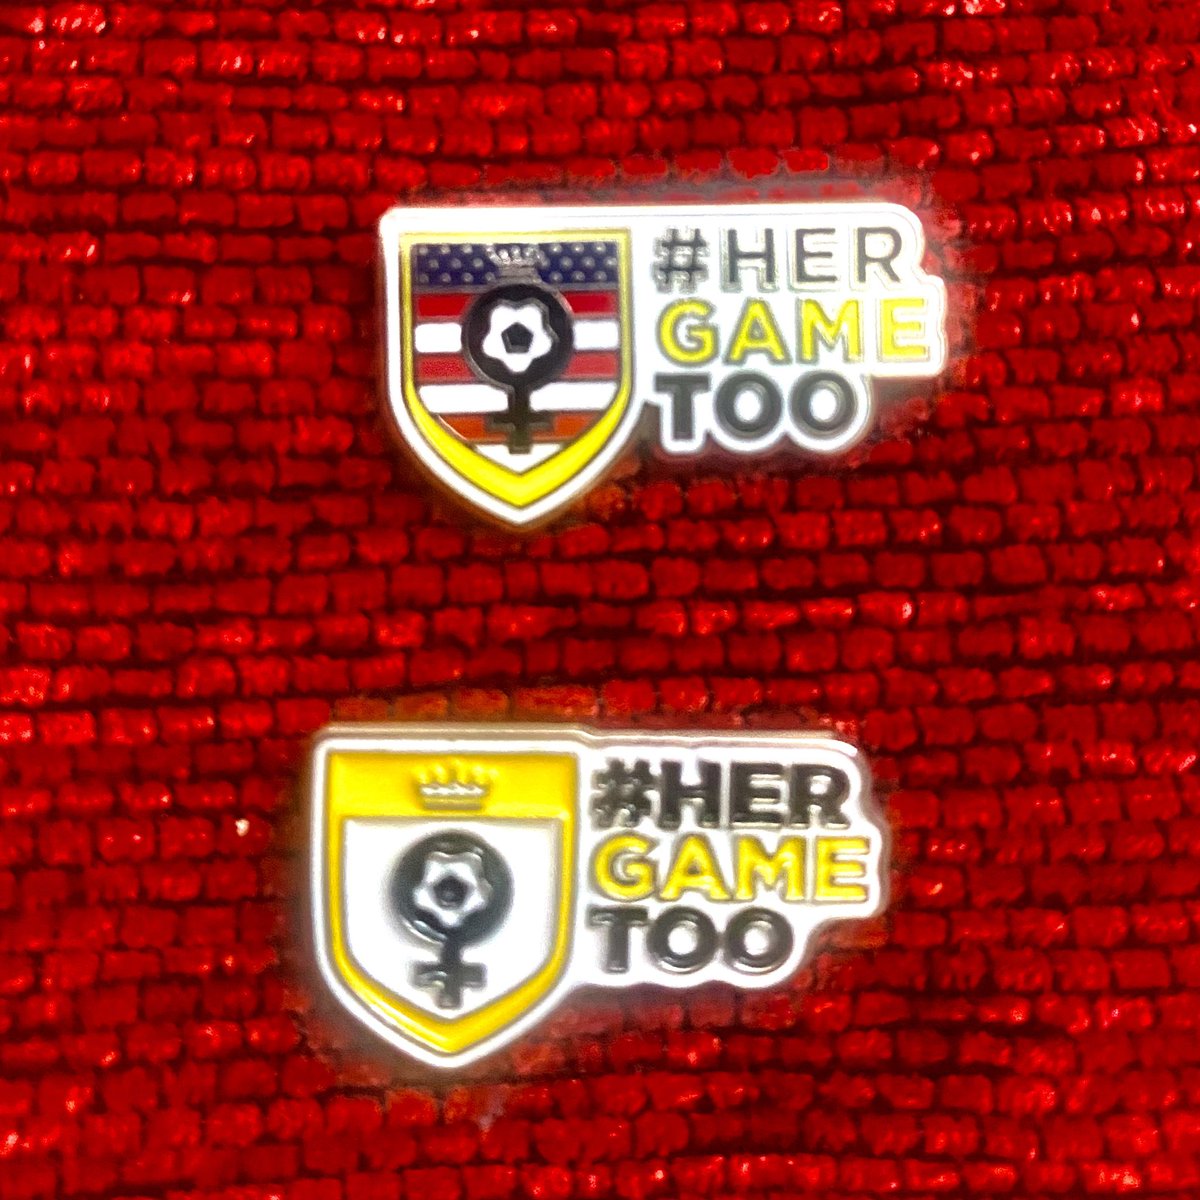 @thebadgemanltd I love ours! You did a fab job @thebadgemanltd! Wear it with pride. ⚽️❤️
#hergametoo #theredway